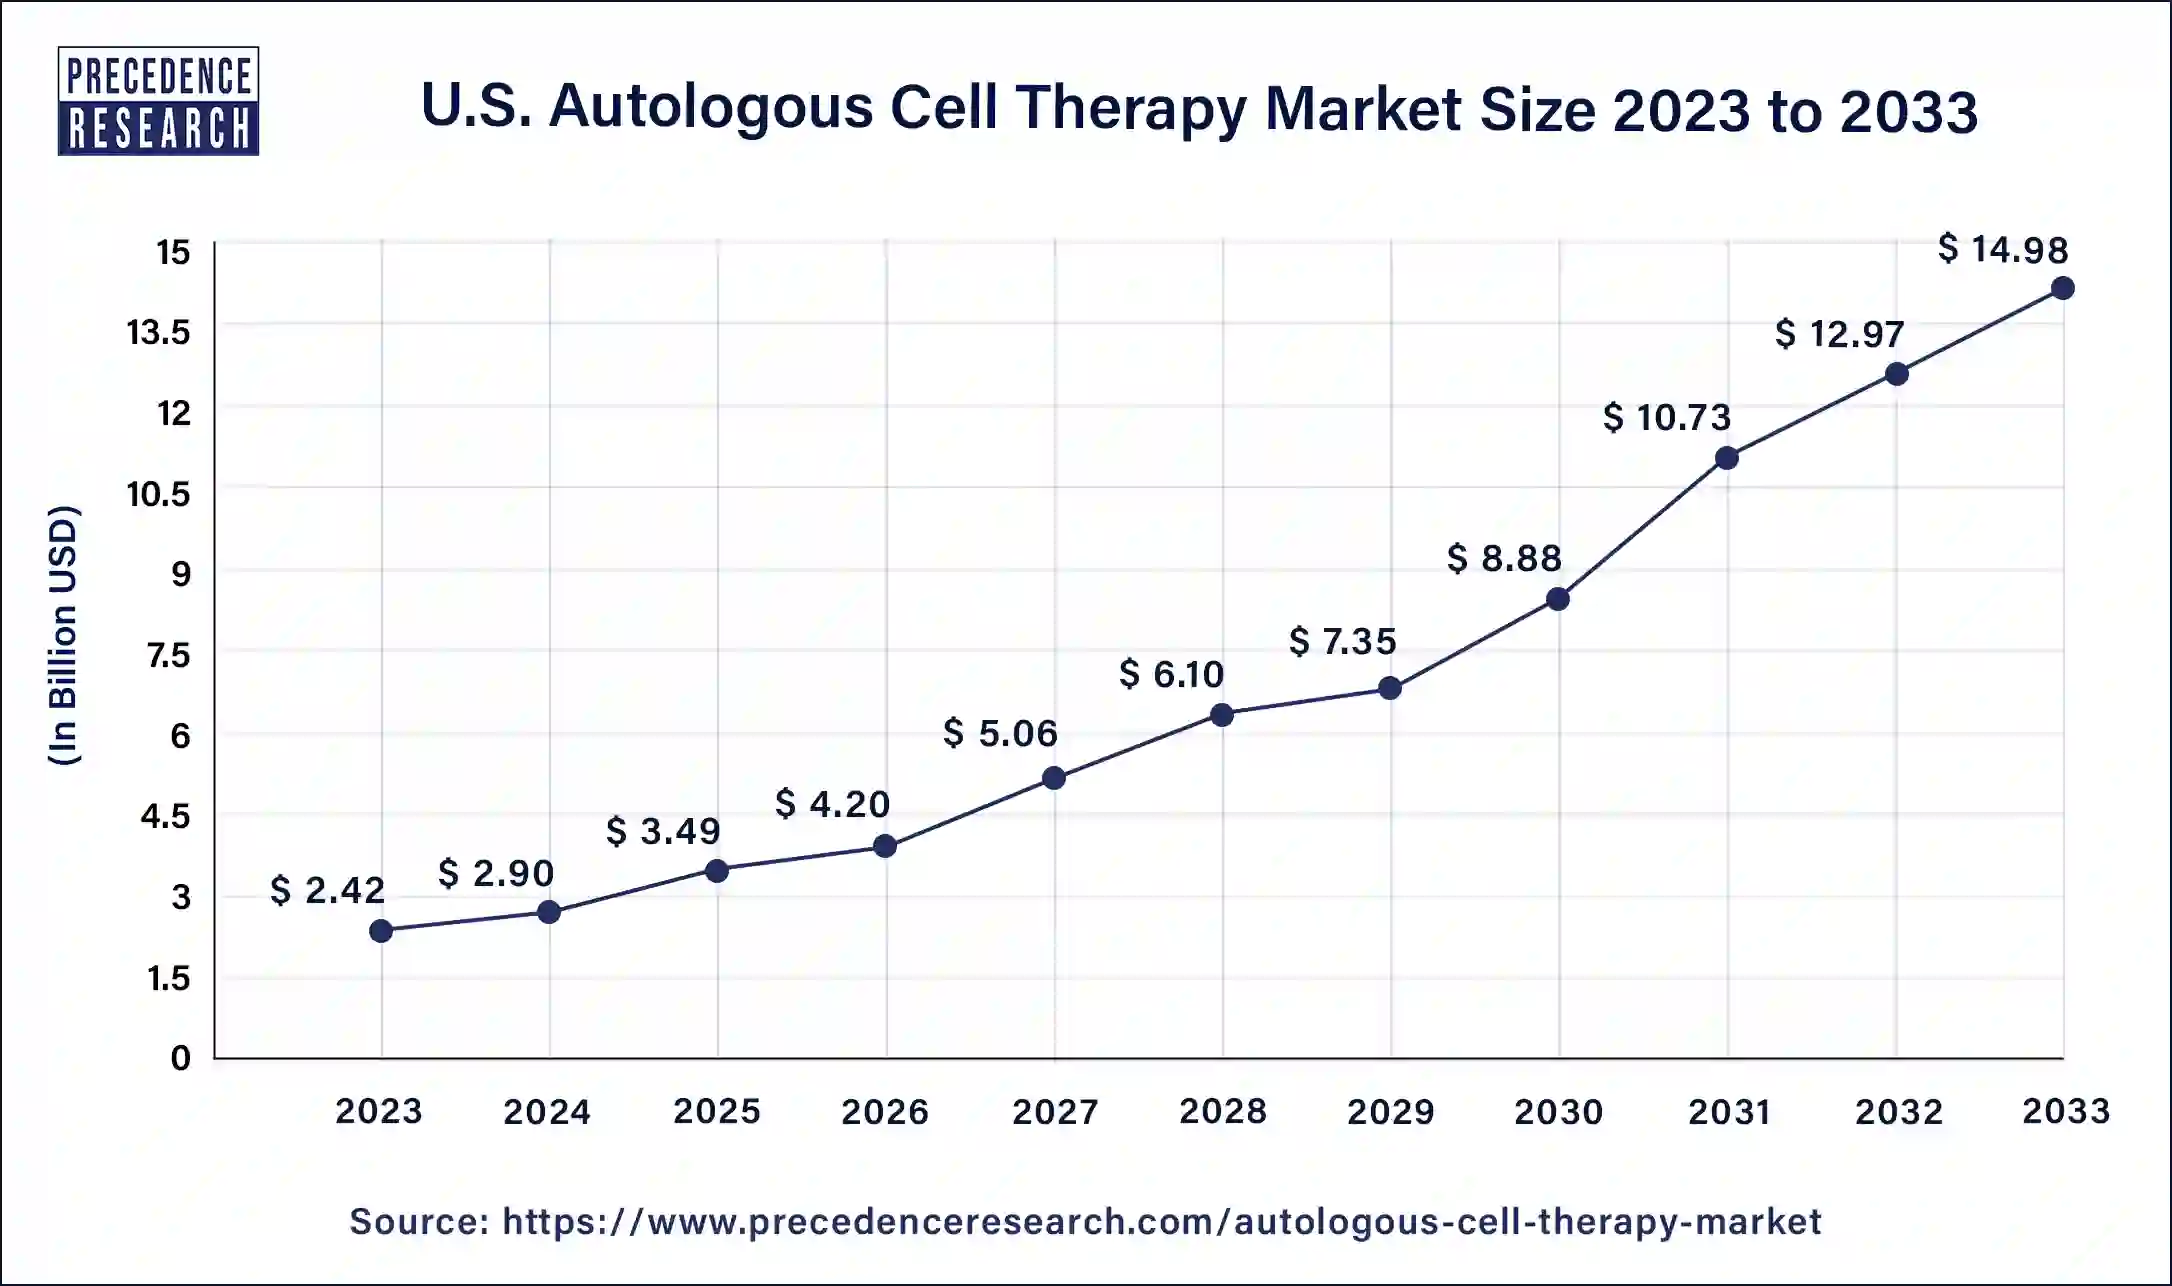 U.S. Autologous Cell Therapy Market Size 2024 to 2033